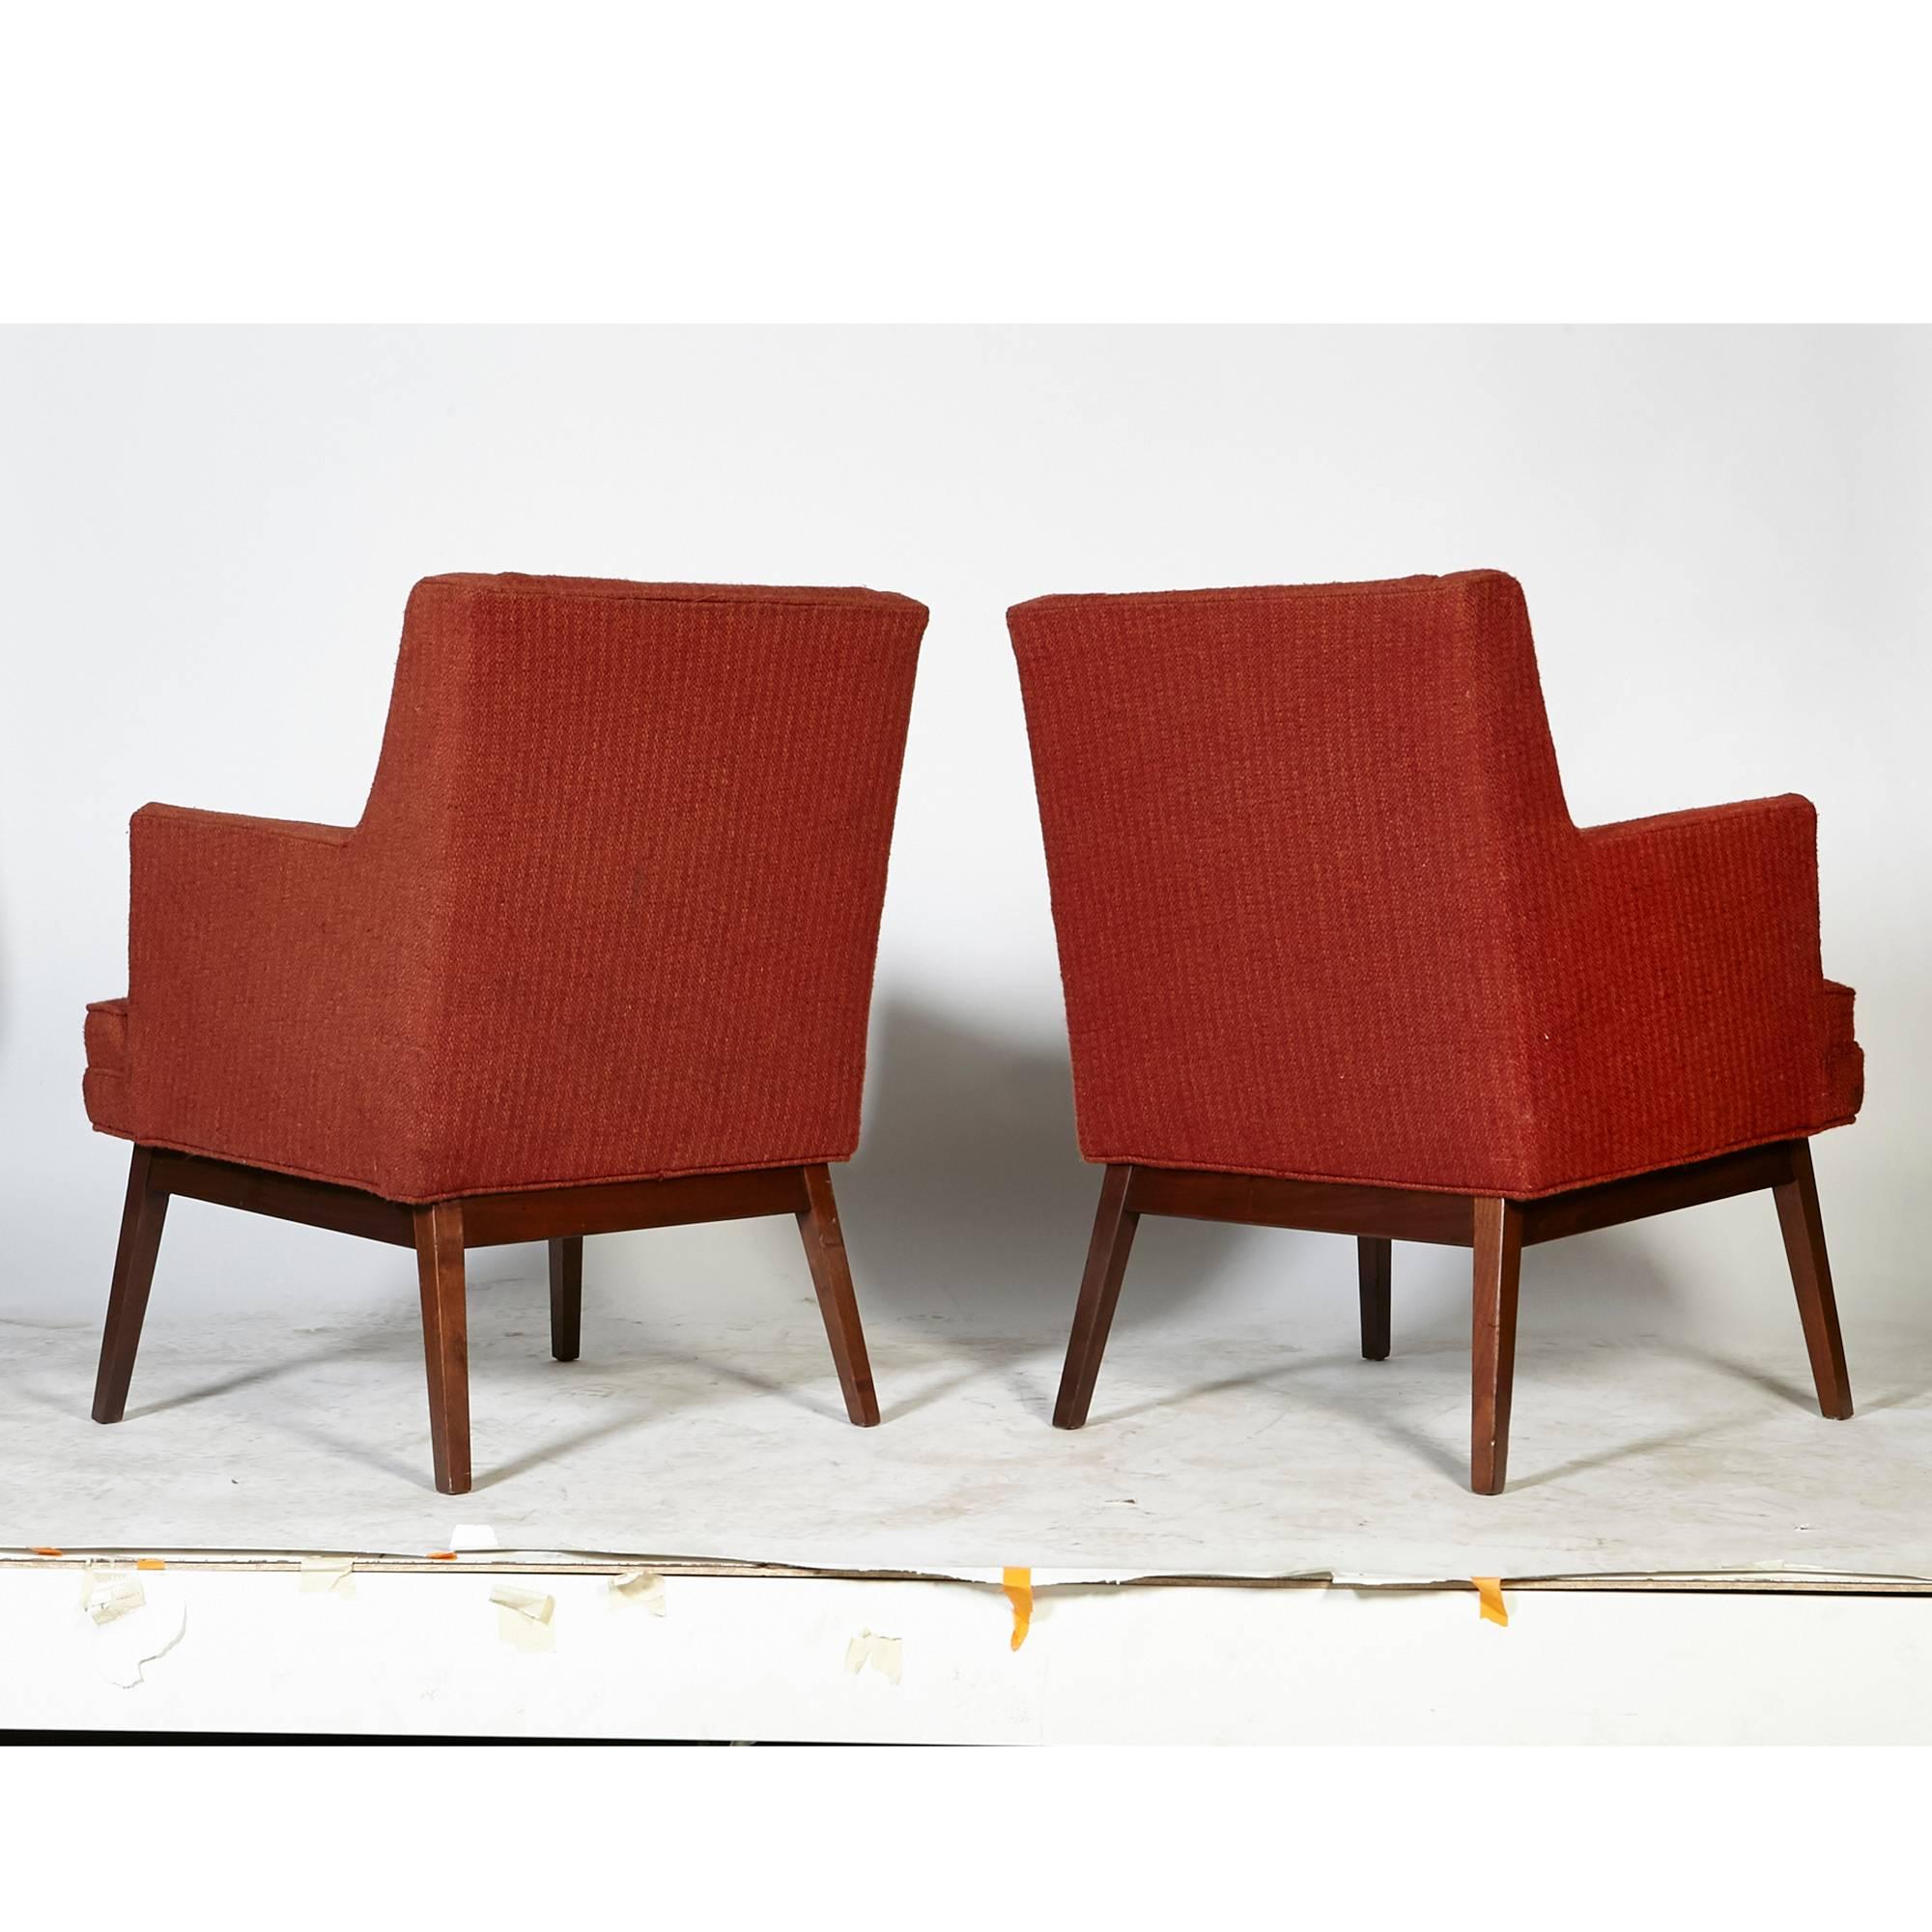 Jens Risom-Style Walnut Frame Lounge Chairs, Pair In Good Condition For Sale In Amherst, NH